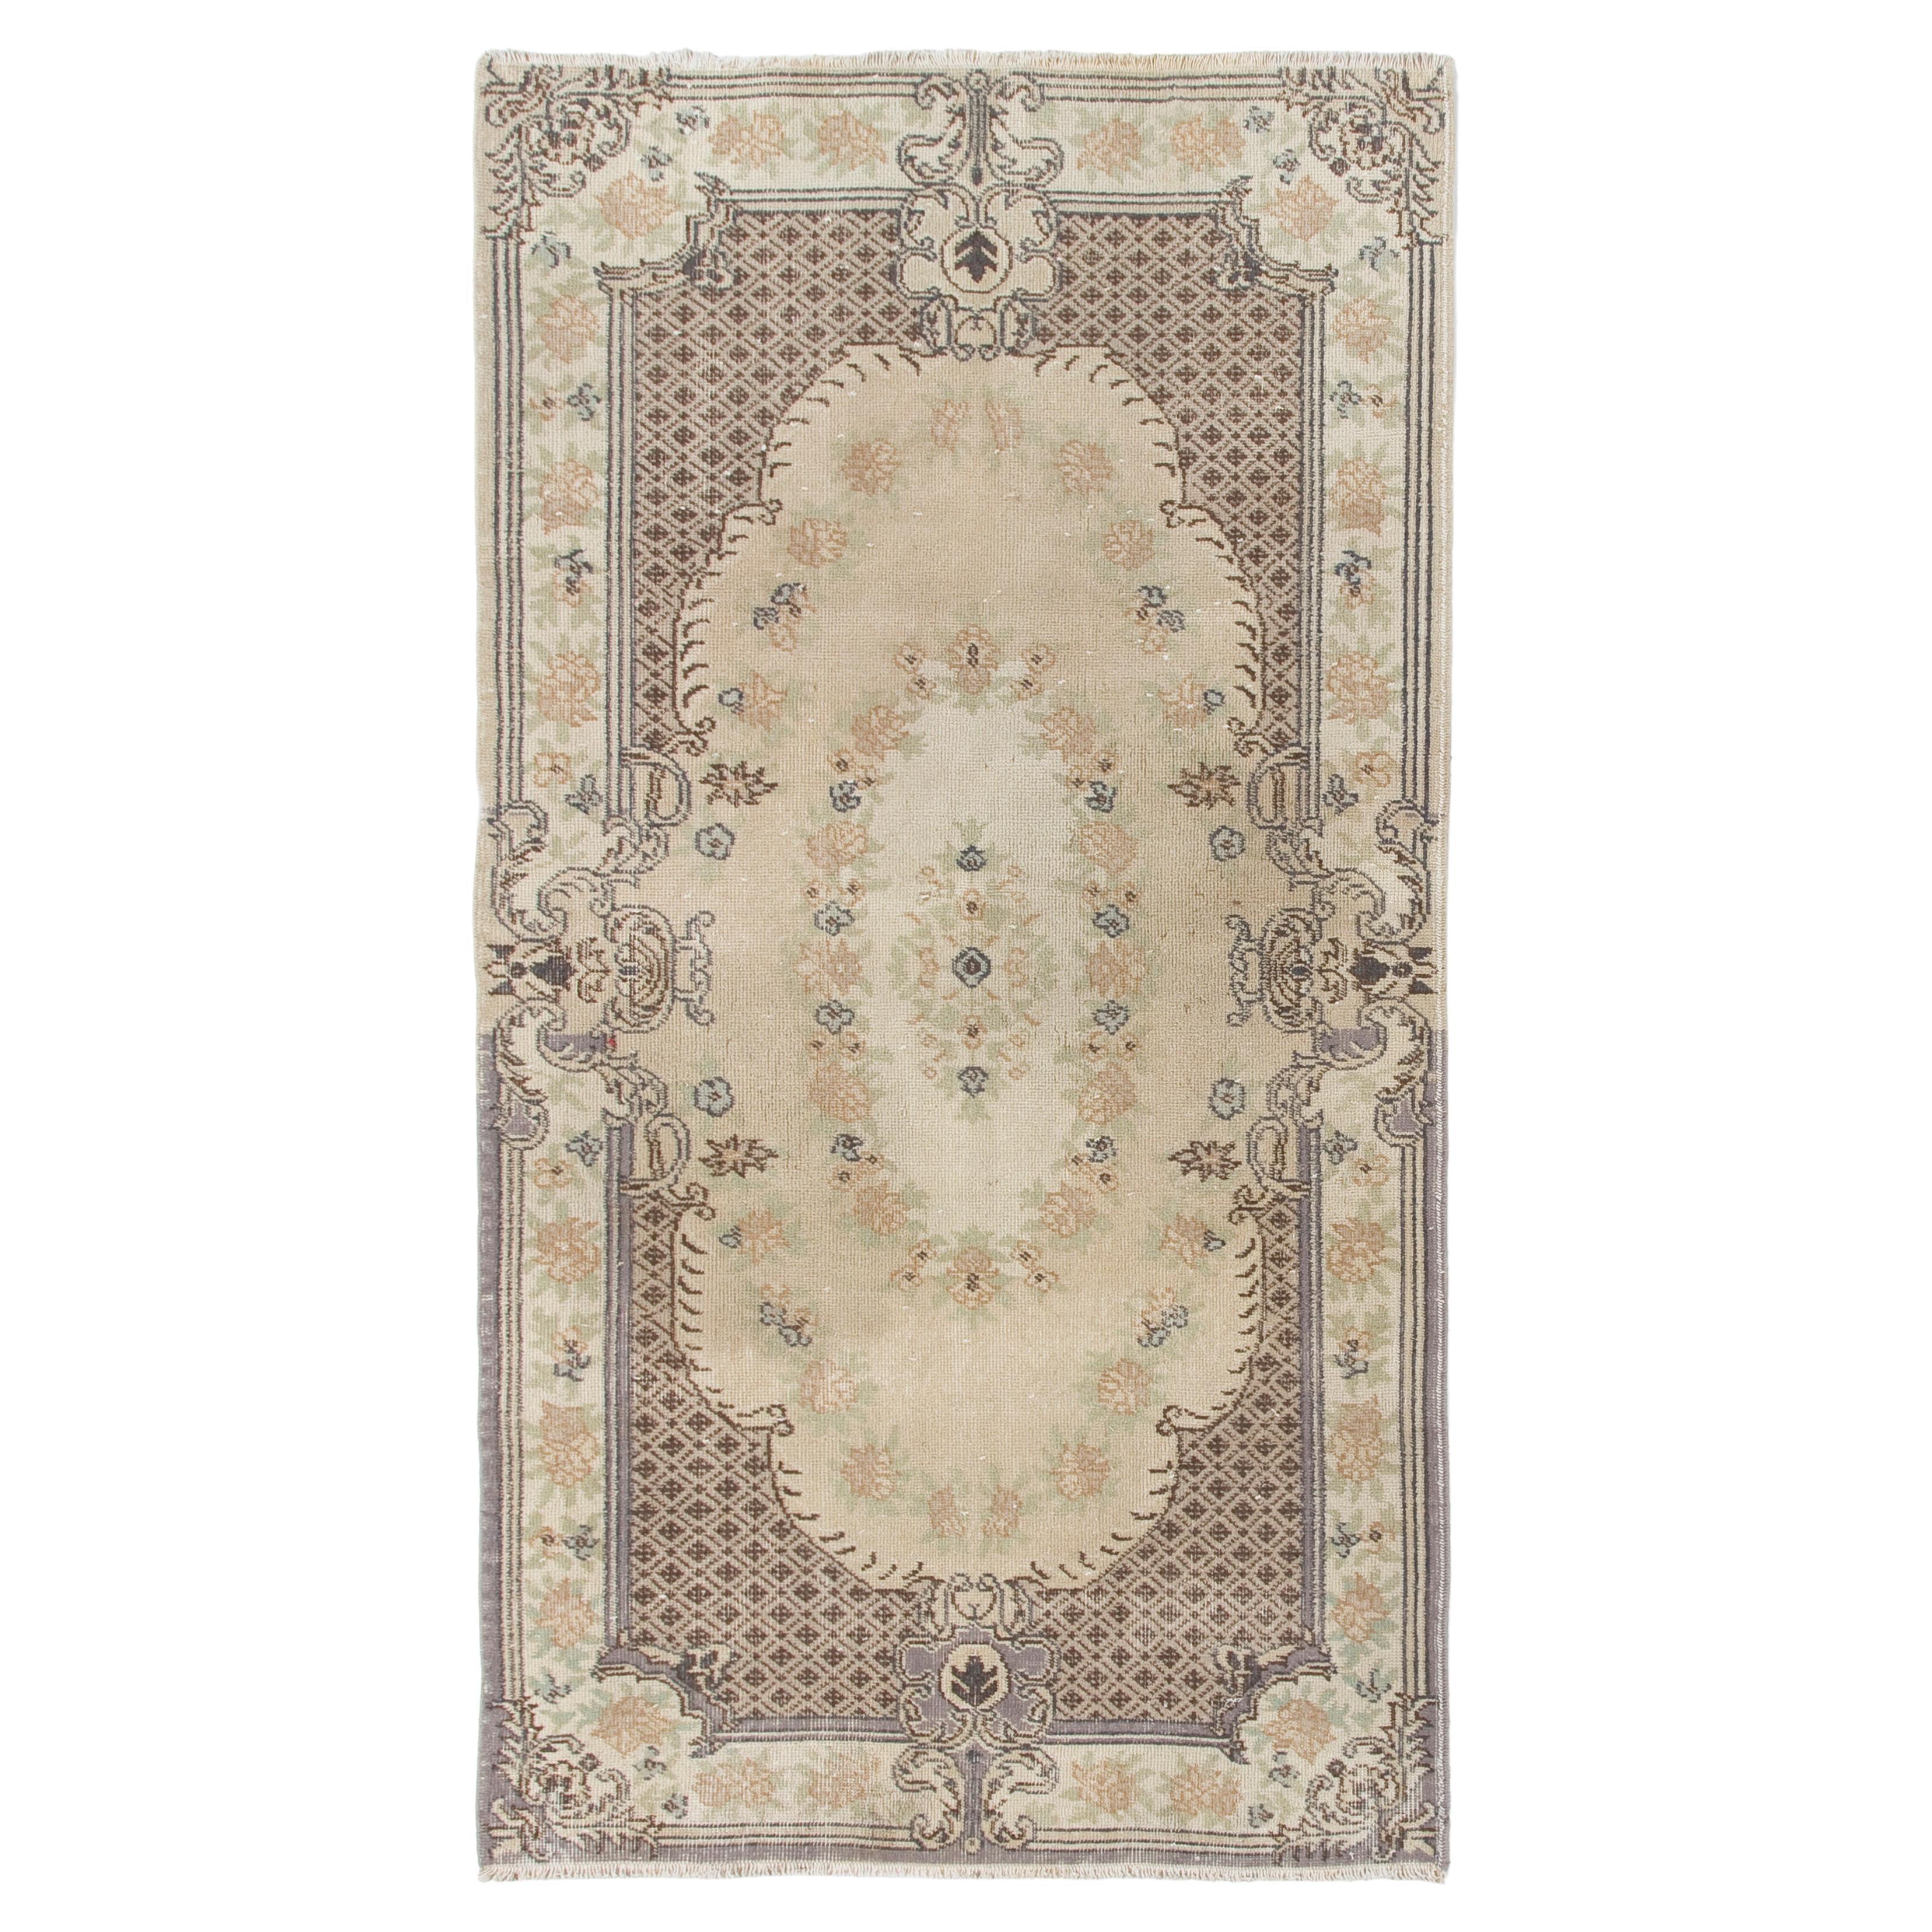 3.8x7 Ft Vintage Hand-Knotted Aubusson-Inspired Turkish Wool Rug in Beige